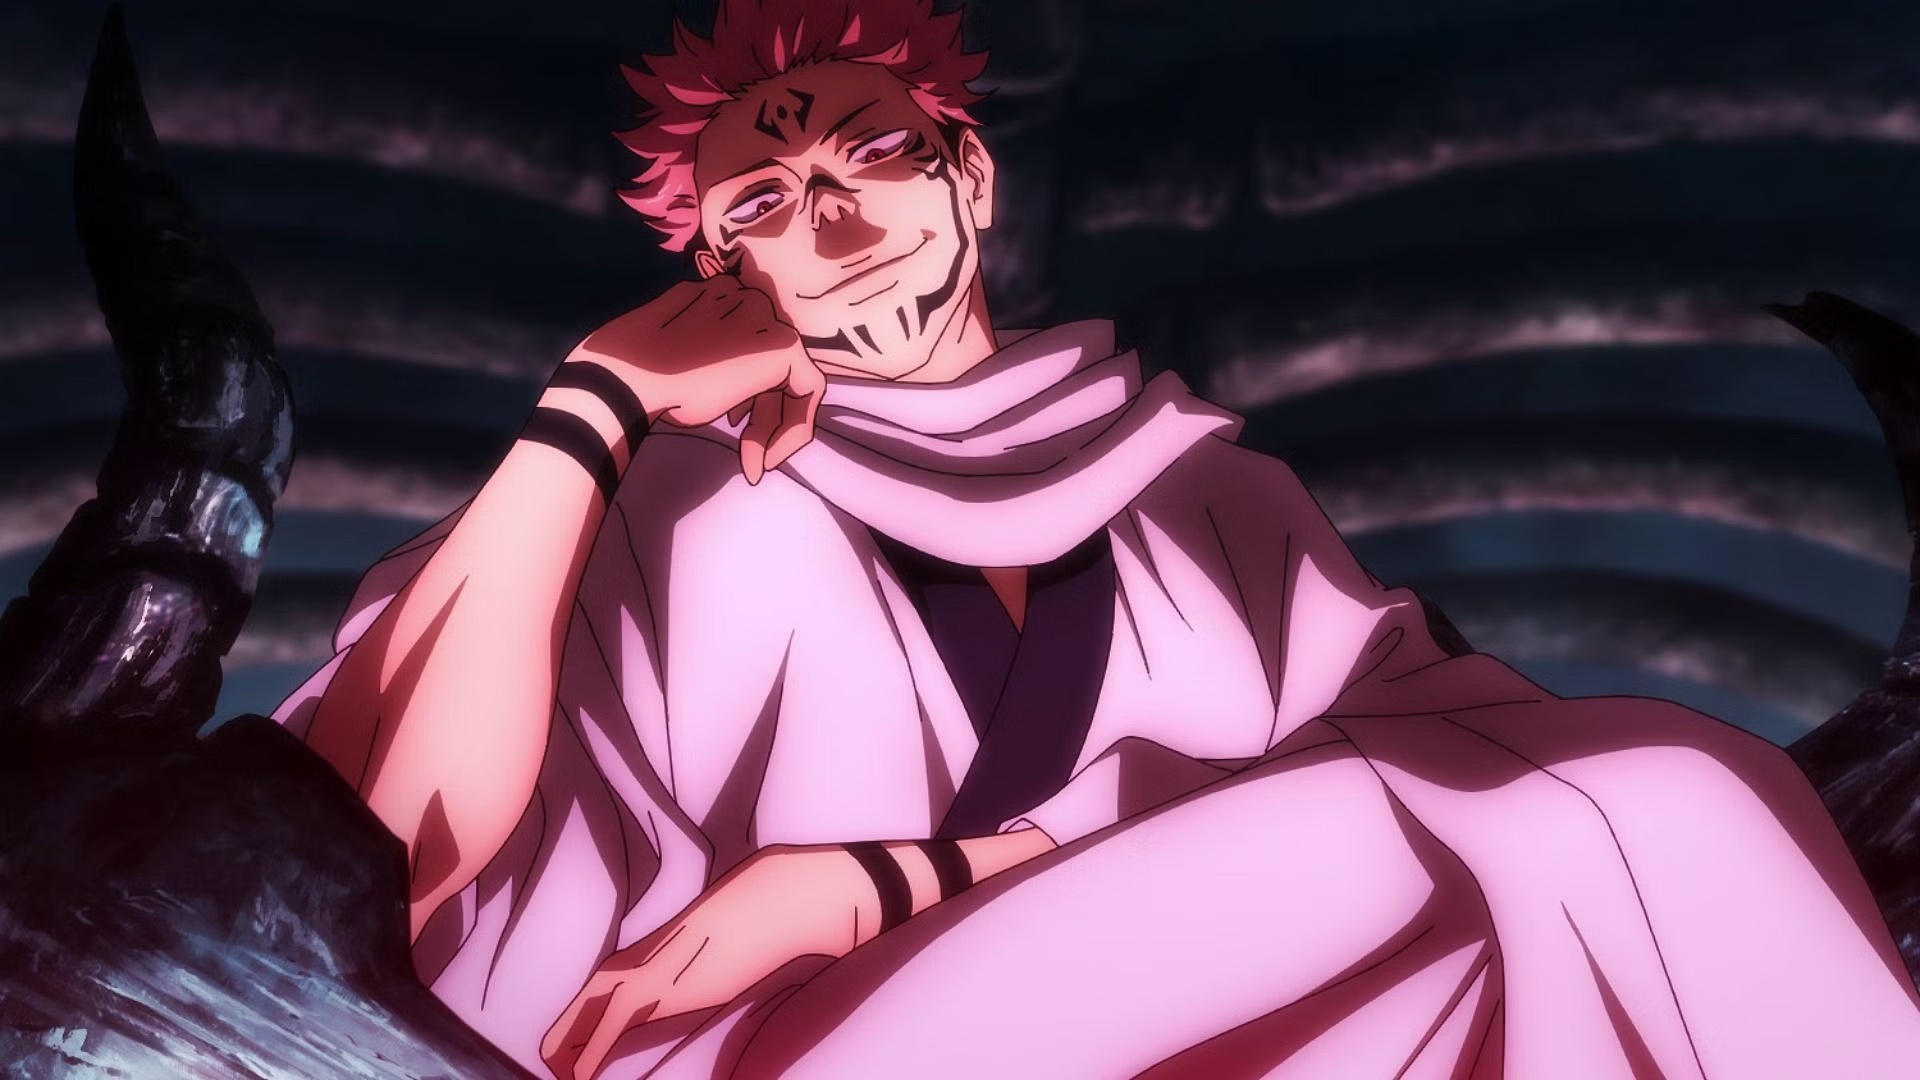 We’ll Save You Some Money: Jujutsu Kaisen Cursed Clash is Not Good, No Need to Wait for Our Review